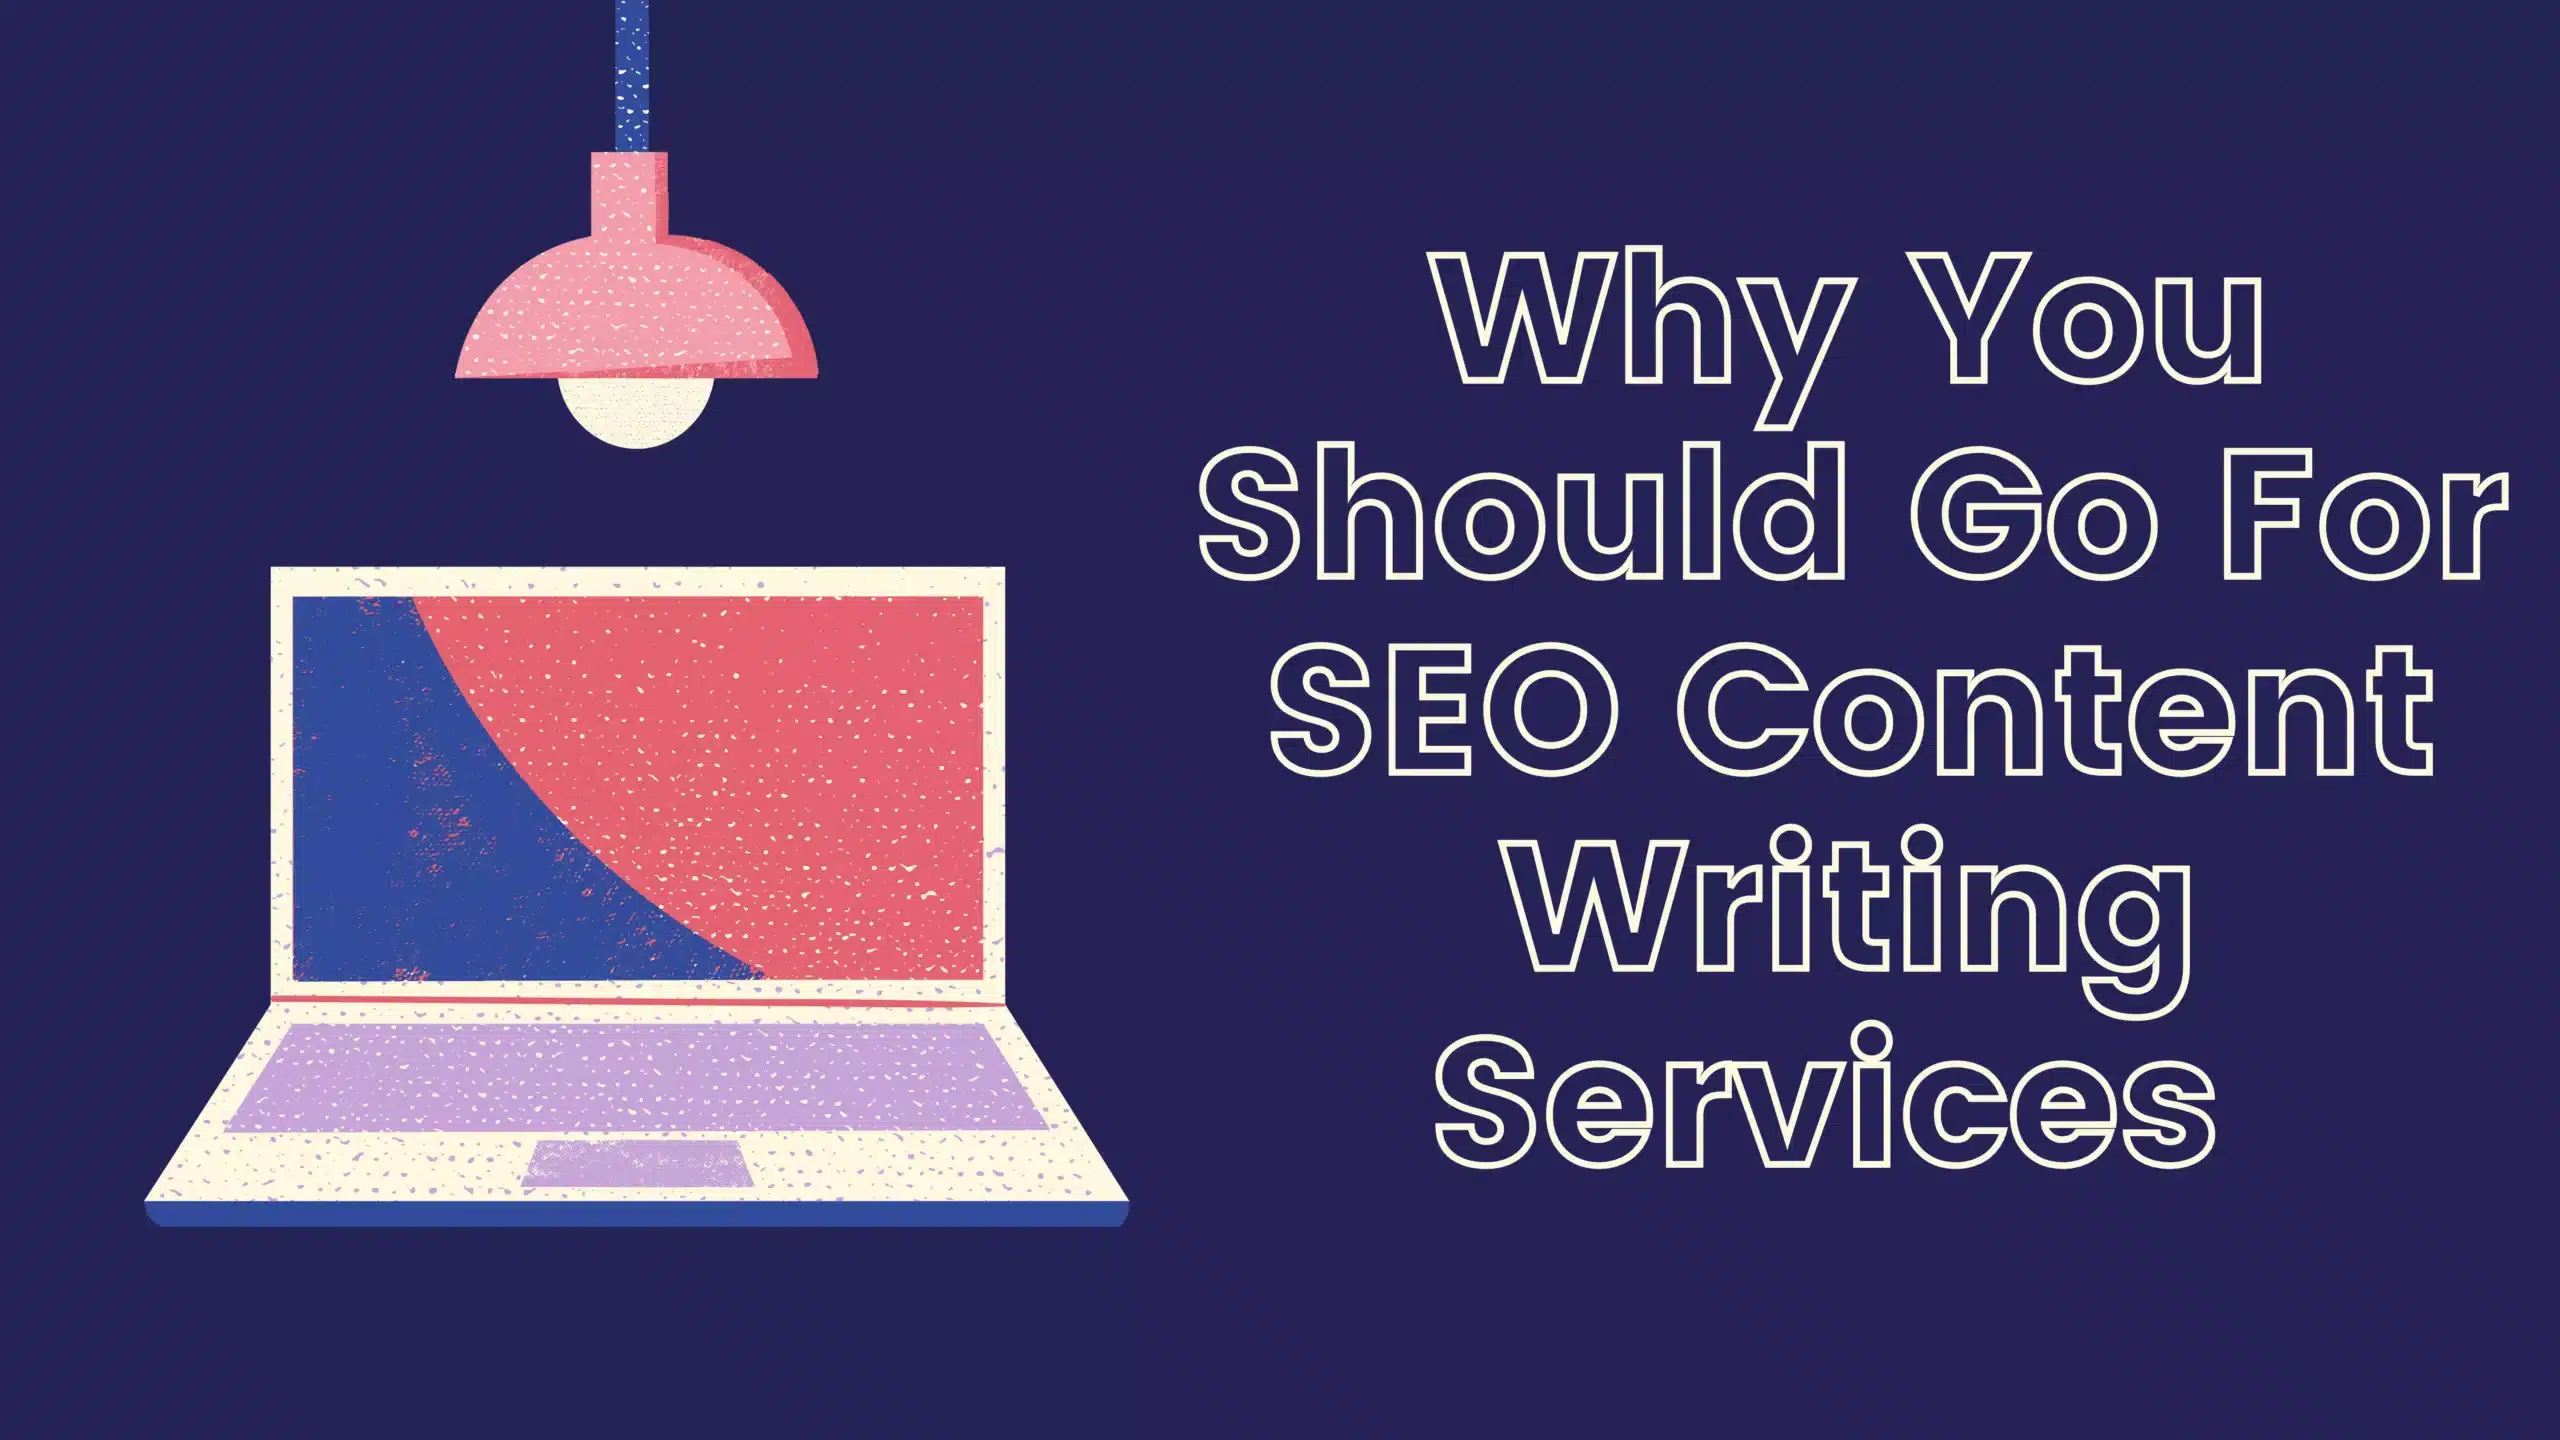 Why You Should Go For SEO Content Writing Services